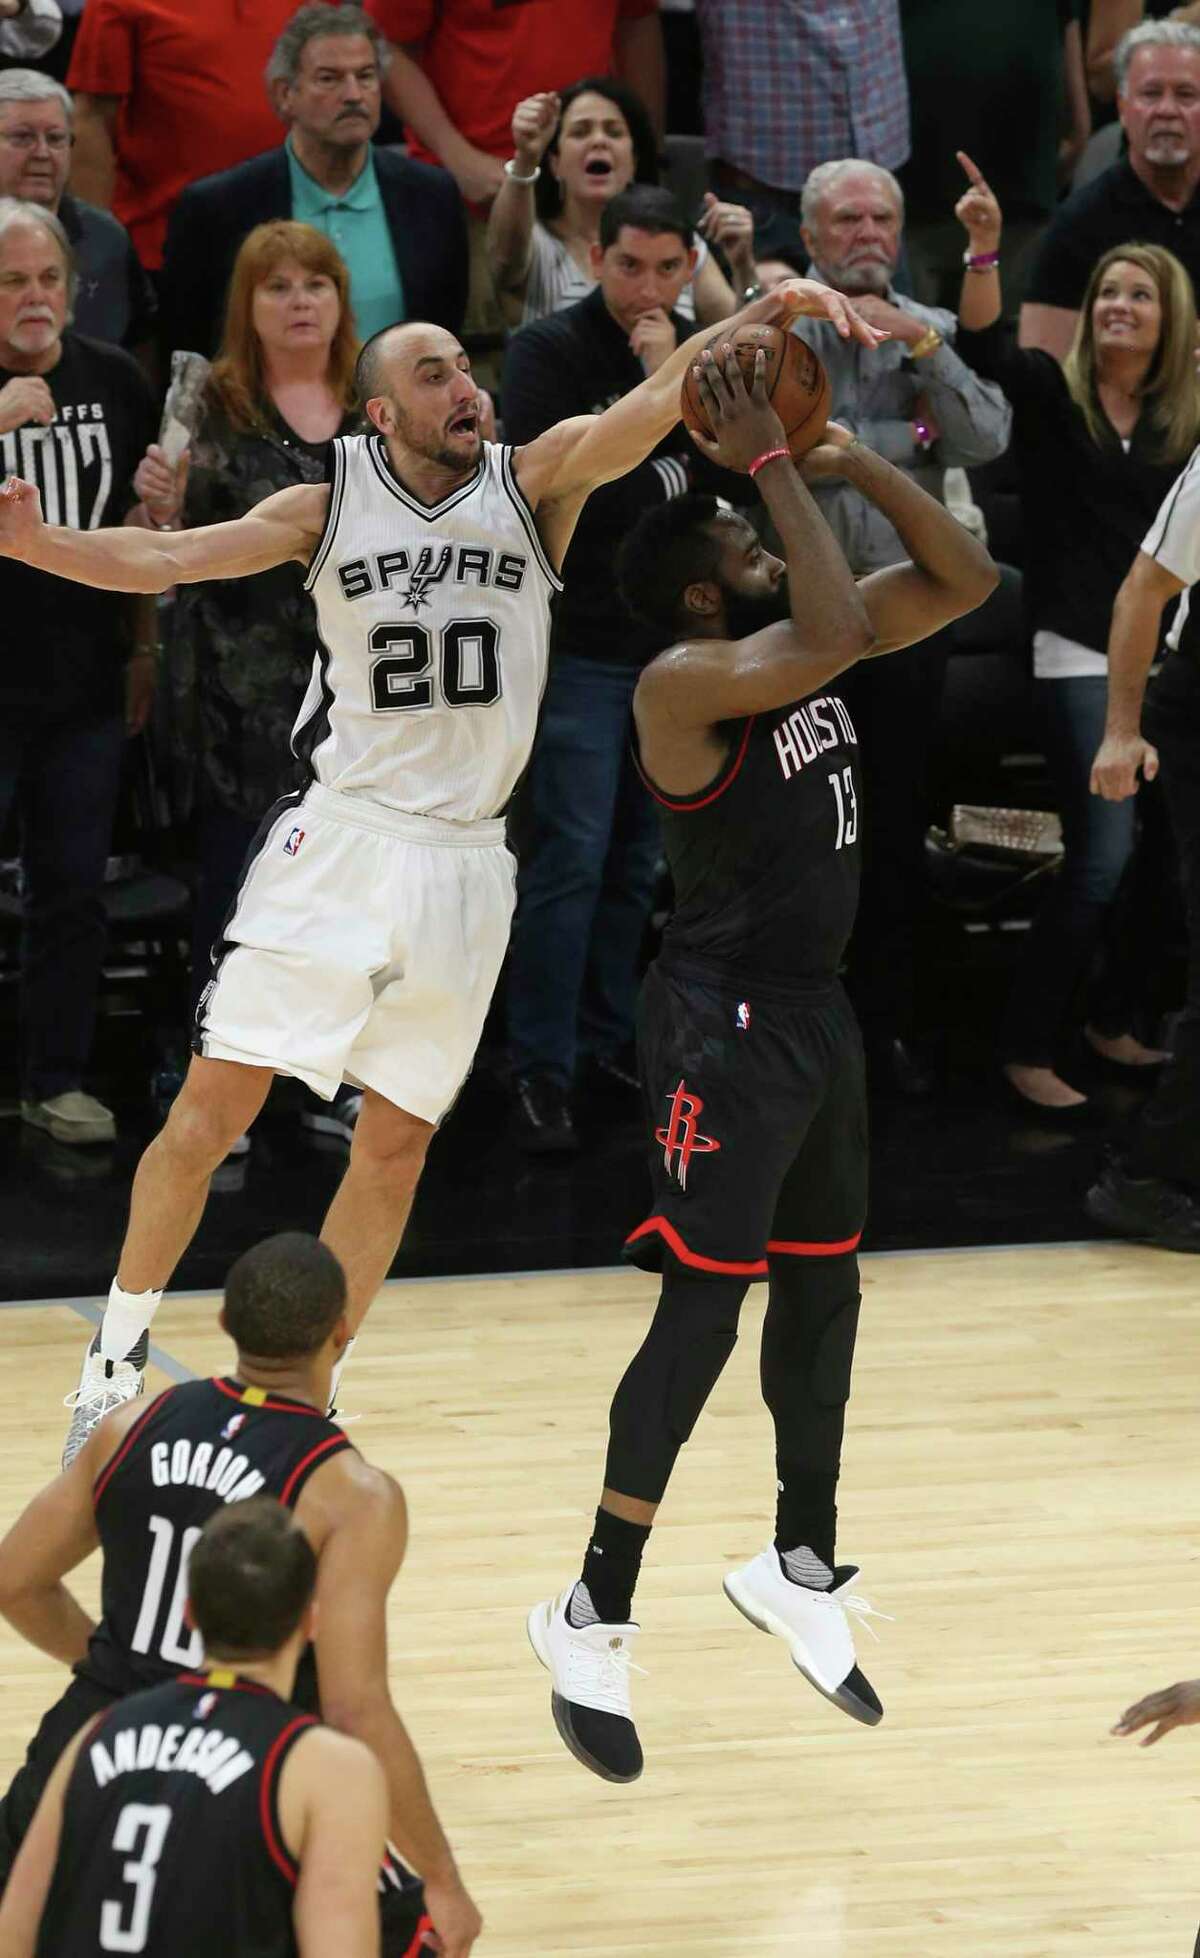 Spurs’ Manu Ginobili blocks Houston Rockets’ James Harden at the end of overtime in the Western Conference semifinals at the AT&T Center on May 9, 2017. The Spurs won in overtime 110-107 to go up in the series, 3-2.